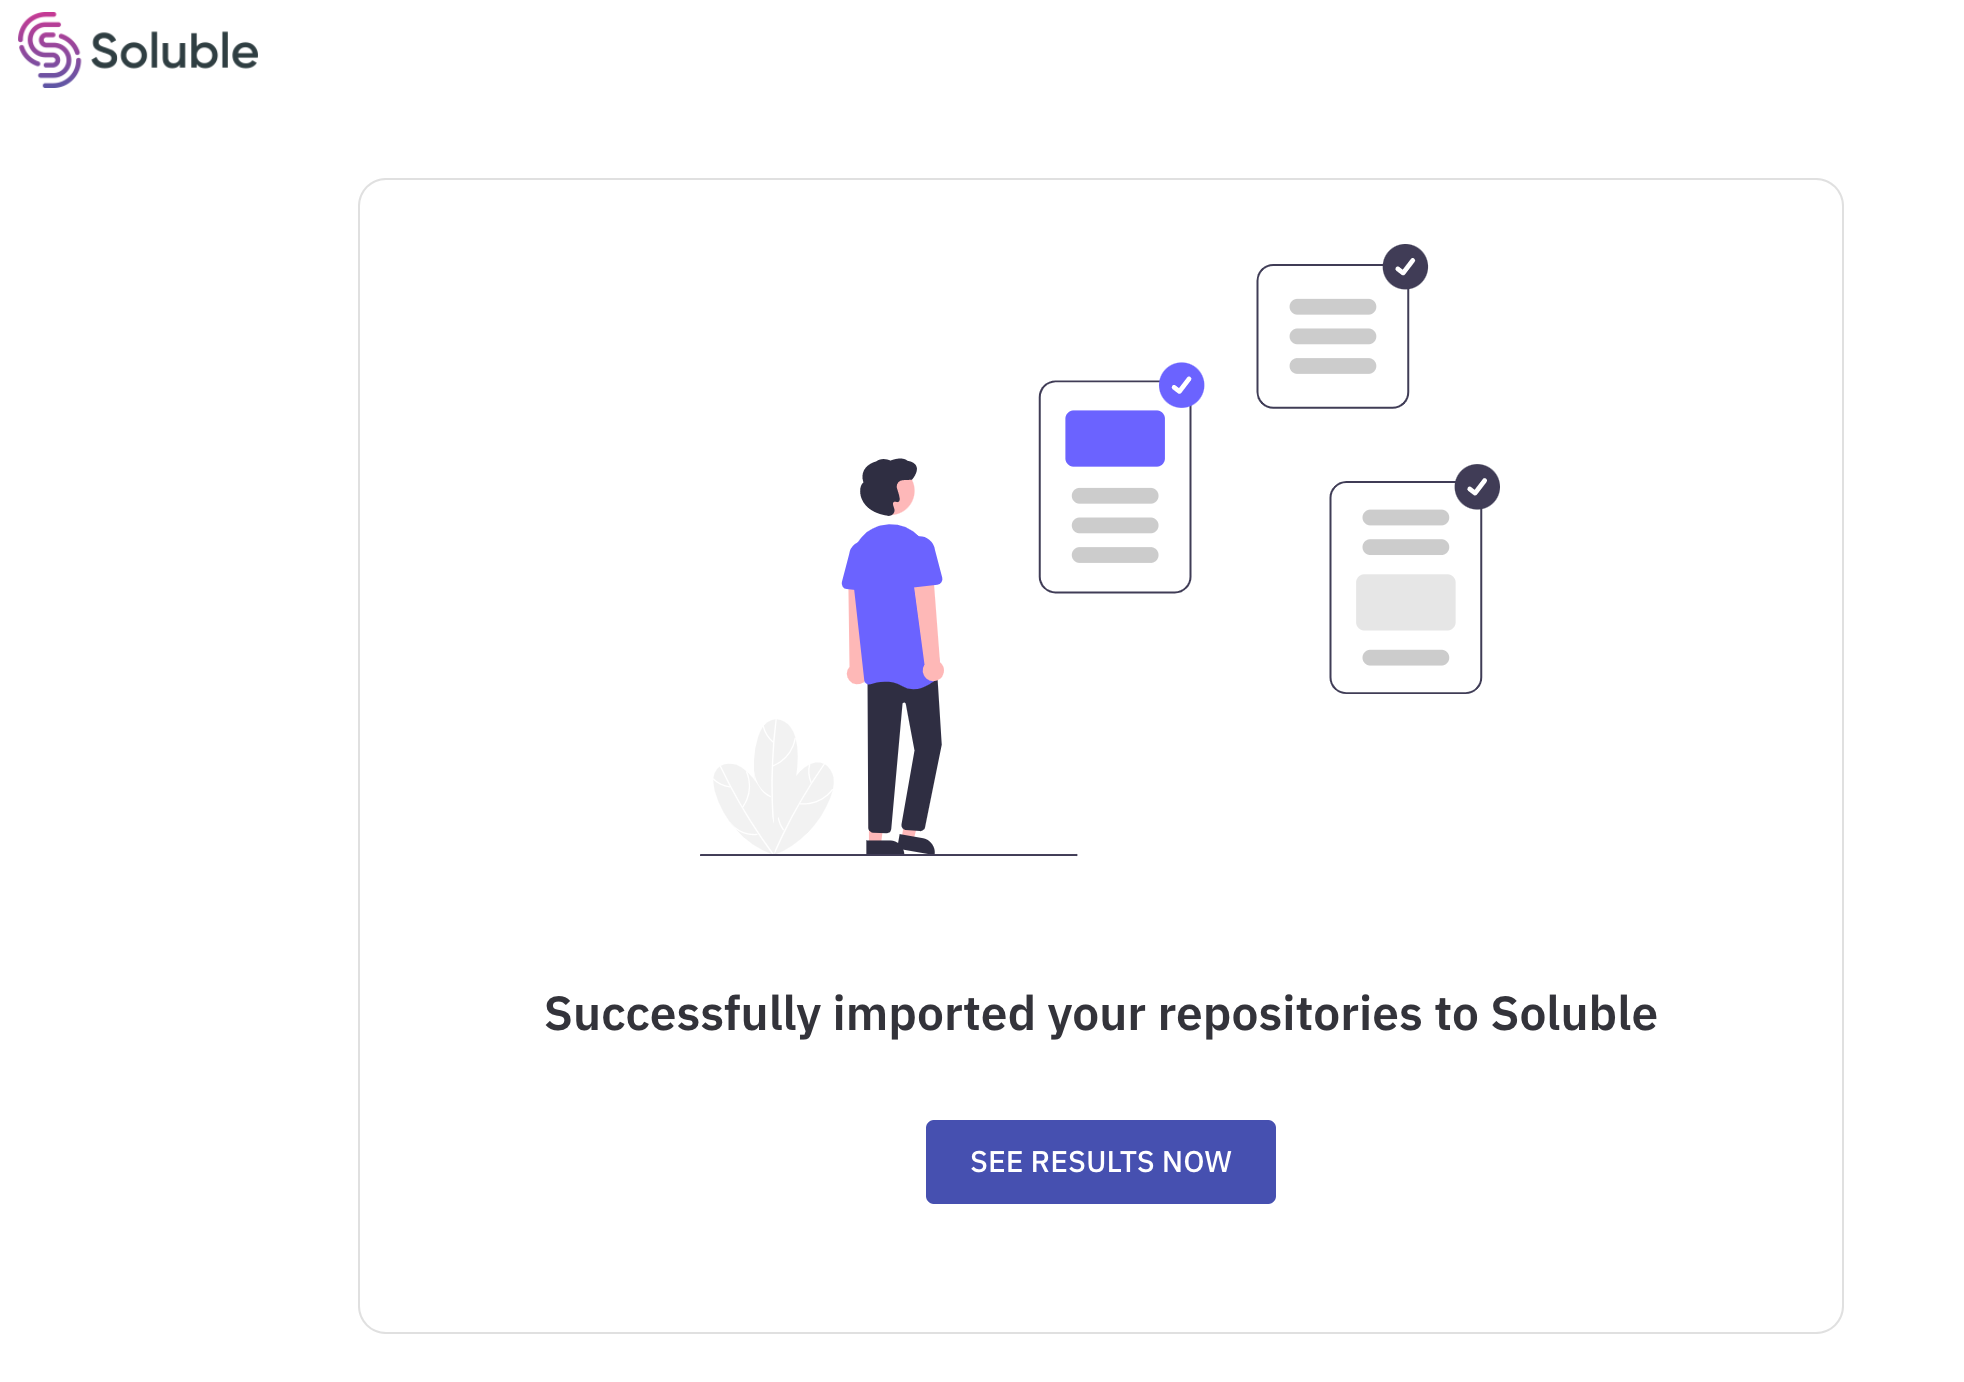 You successfully imported your repositories into Soluble